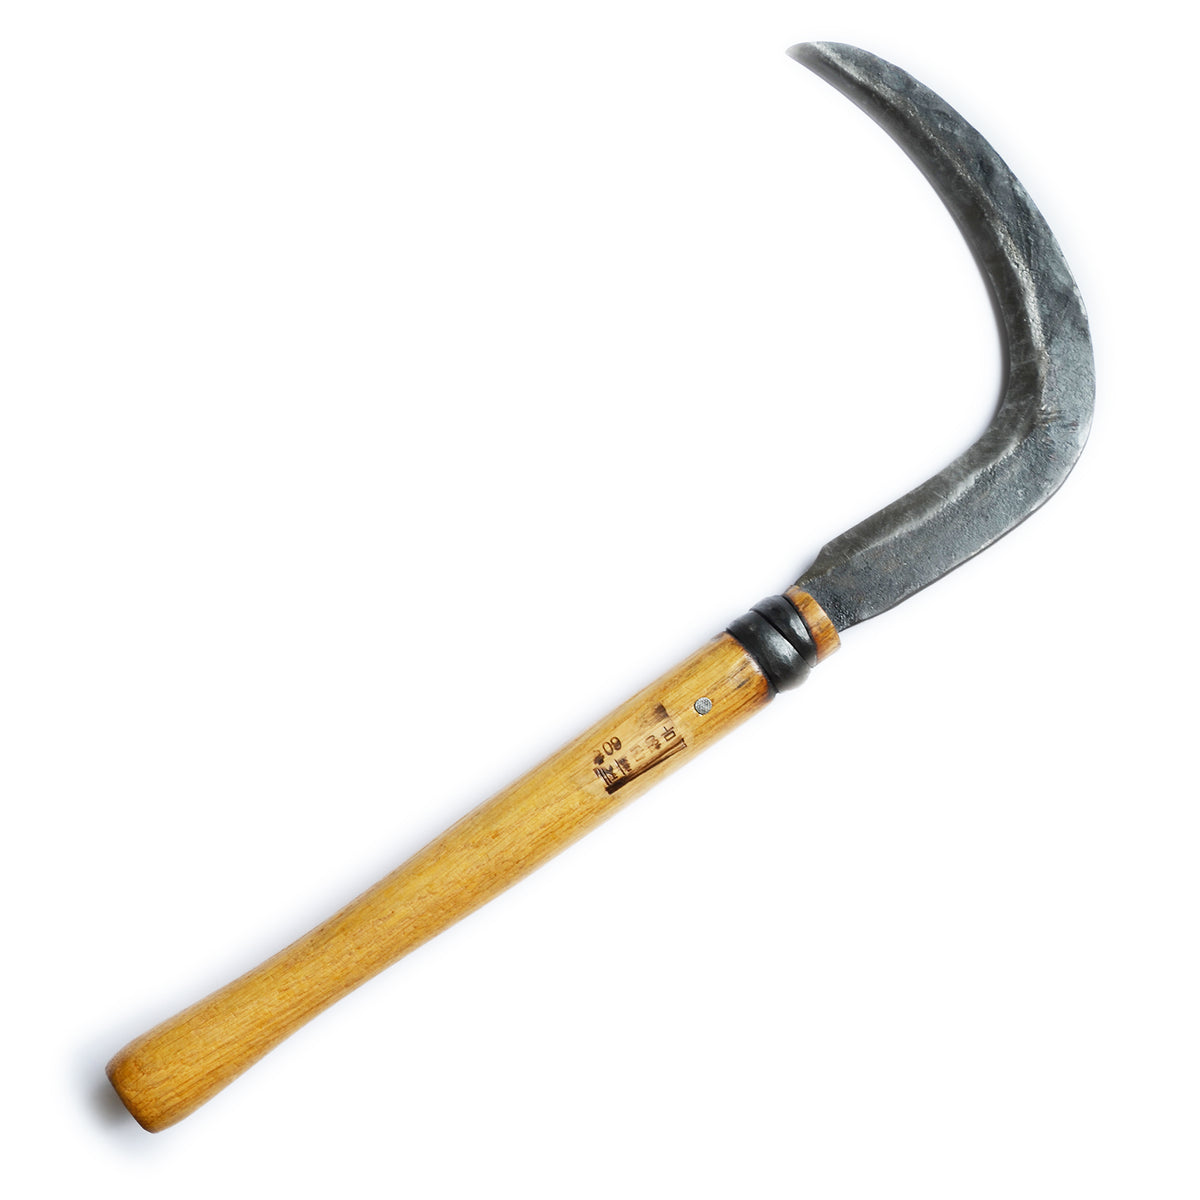 https://www.vertigohome.shop/wp-content/uploads/1695/47/find-the-latest-products-and-services-for-a-low-price-at-66-sickle-by-master-shins-anvil-ameico_0.jpg